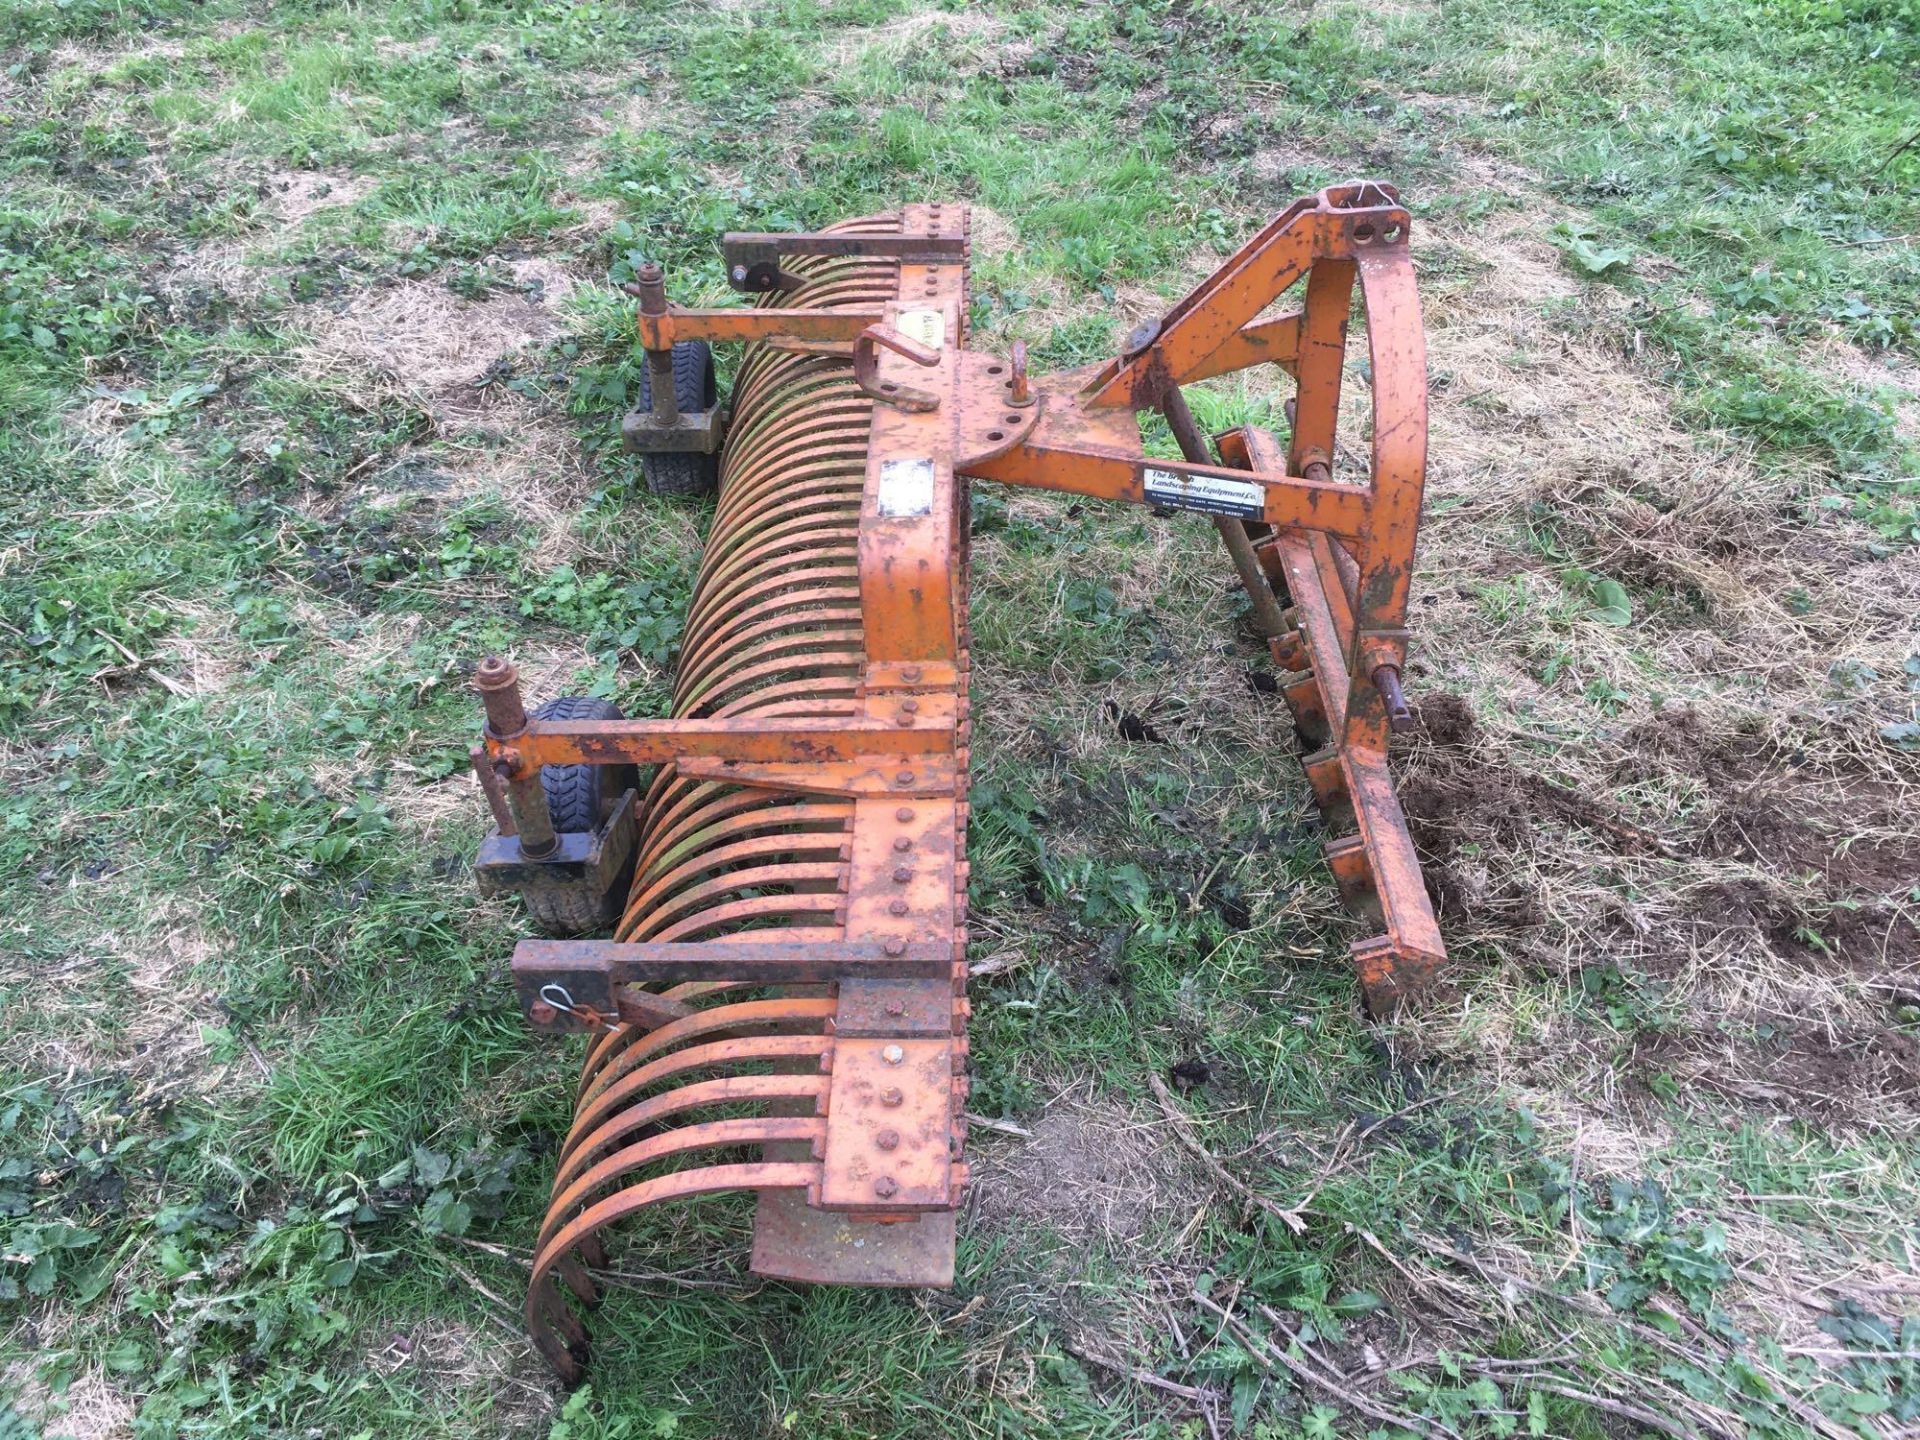 York rake for compact tractor 6' width, c/w optional grader bar & scarifying teeth (1 missing). - Image 5 of 5